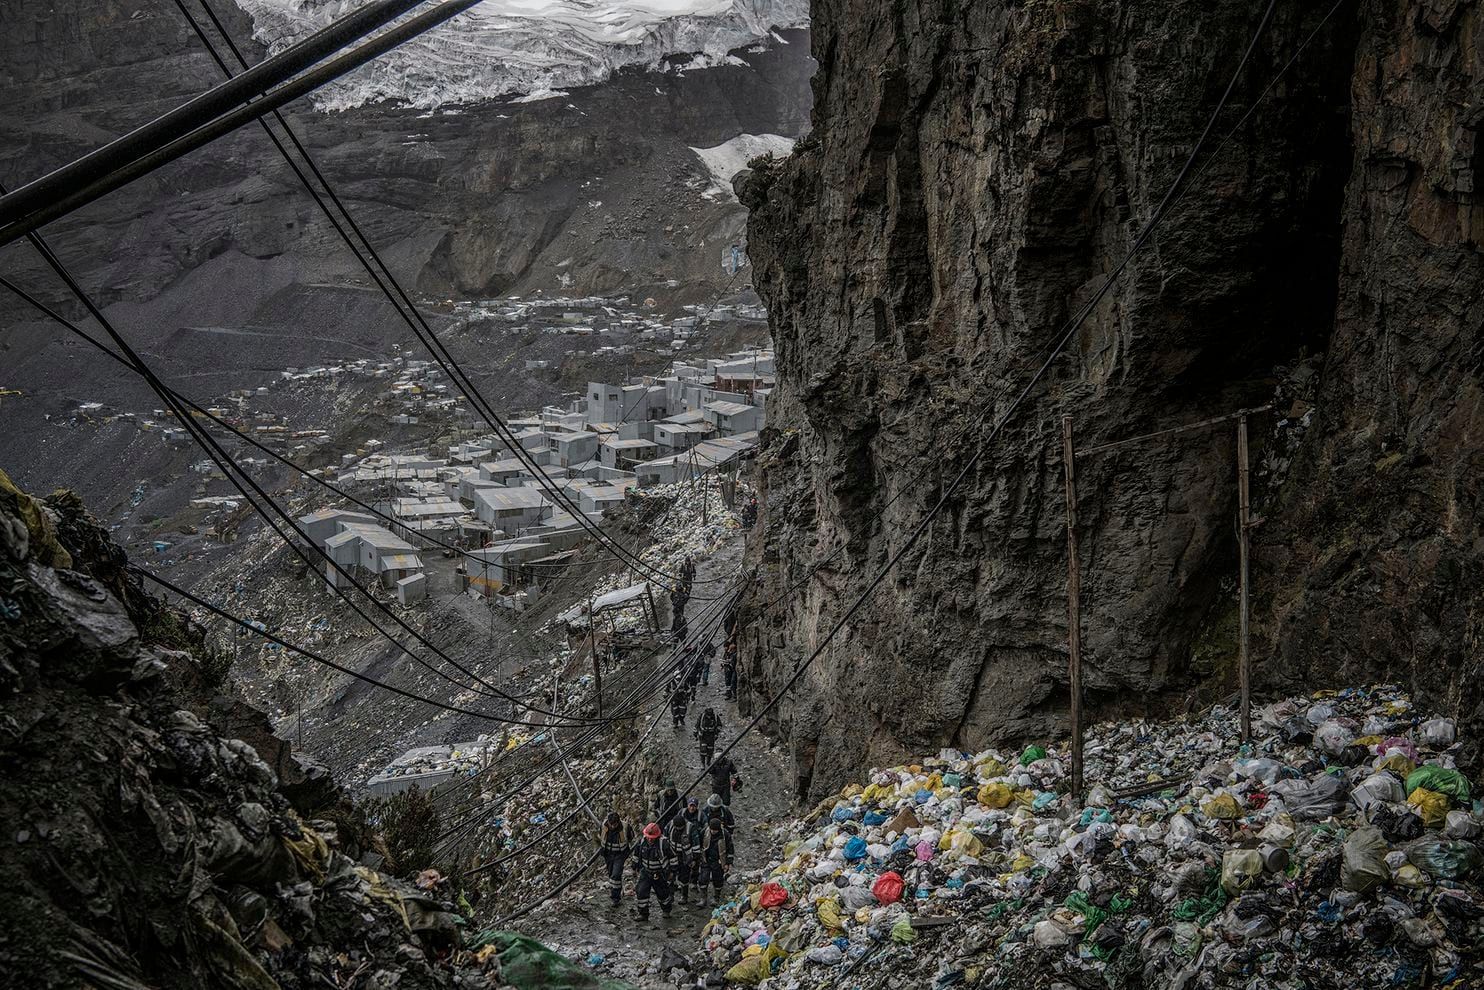 Workers return from the mines for lunch along a pathway etched into a cliff, past a mountain of garbage, at the La Rinconada gold mine complex in Peru. Peru,2019. Image by James Whitlow Delano.